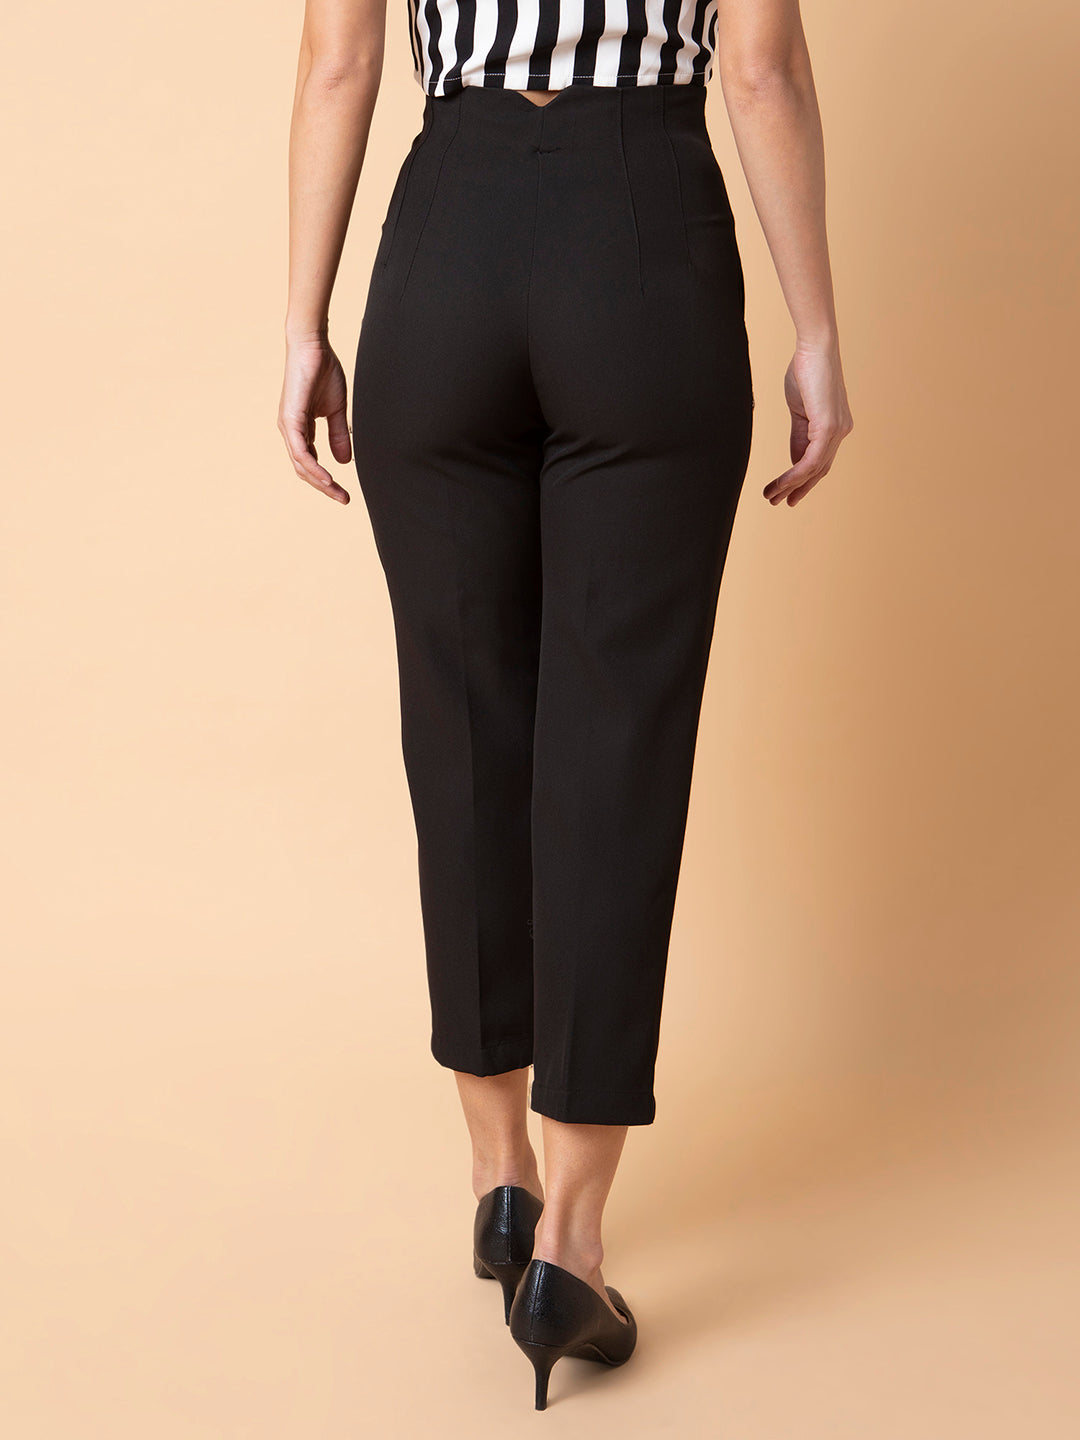 Women Pleated Solid Black Formal Trousers